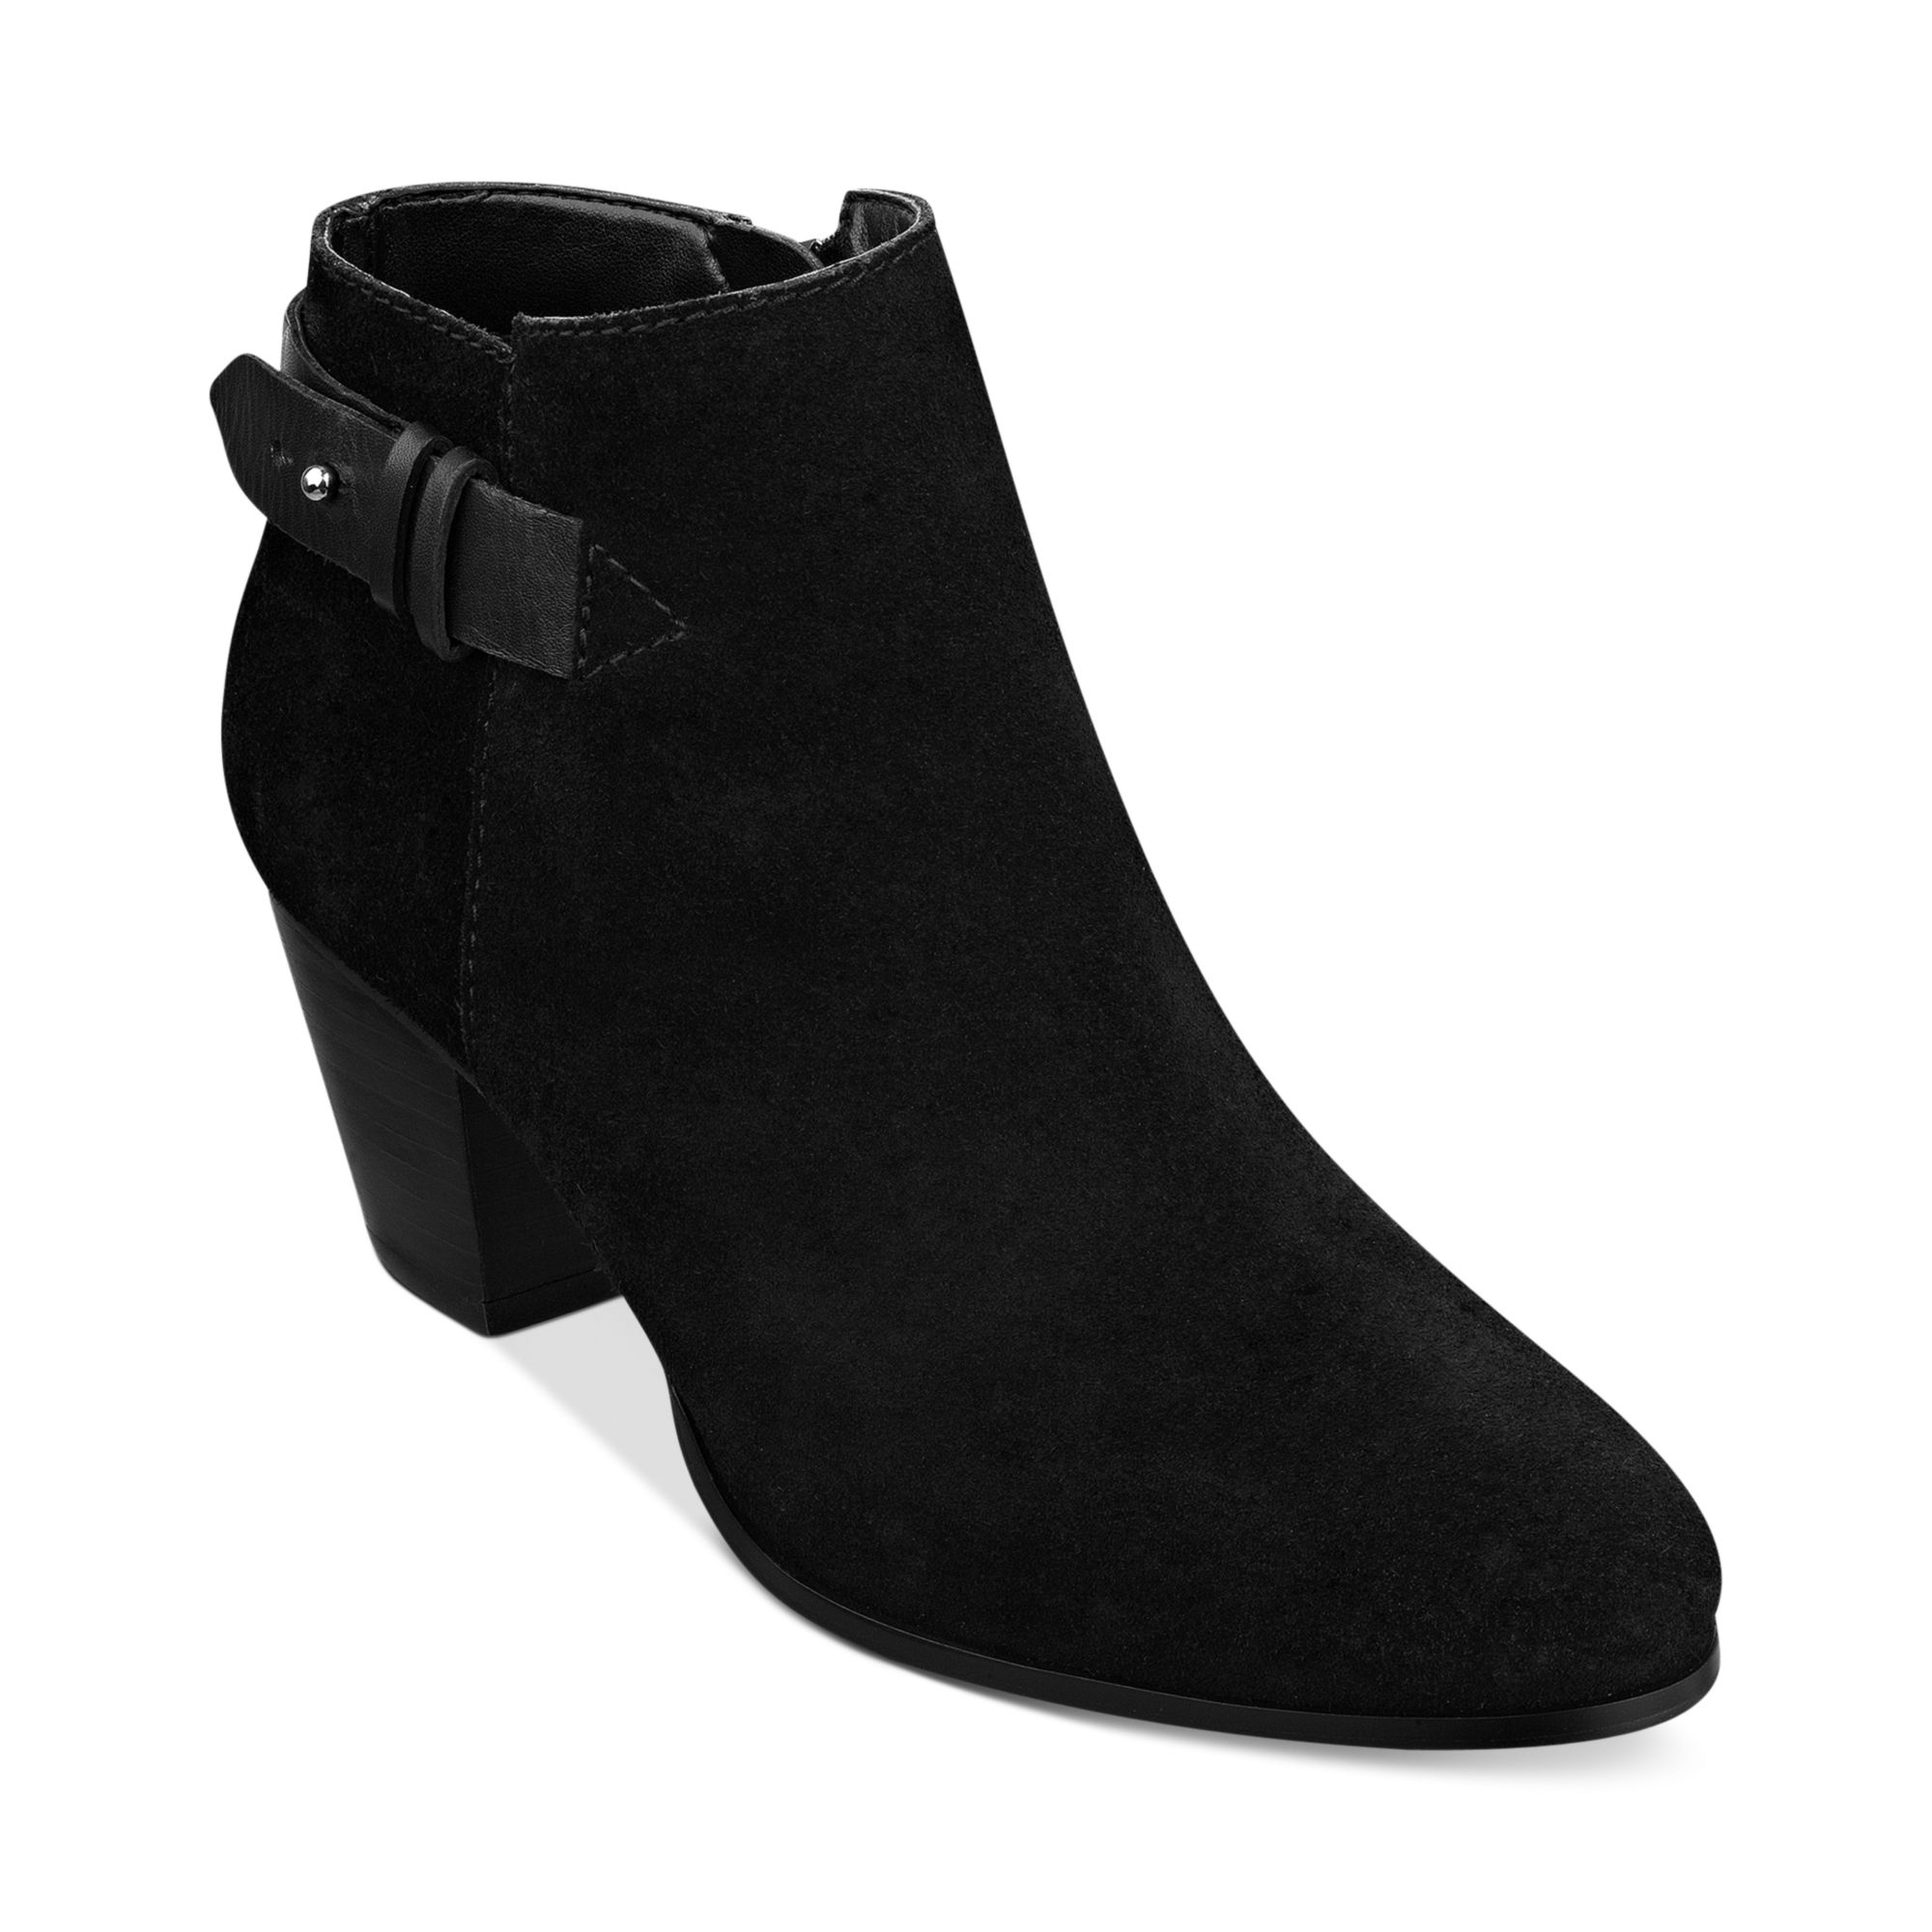 Guess Boots Veora Booties in Black - Lyst